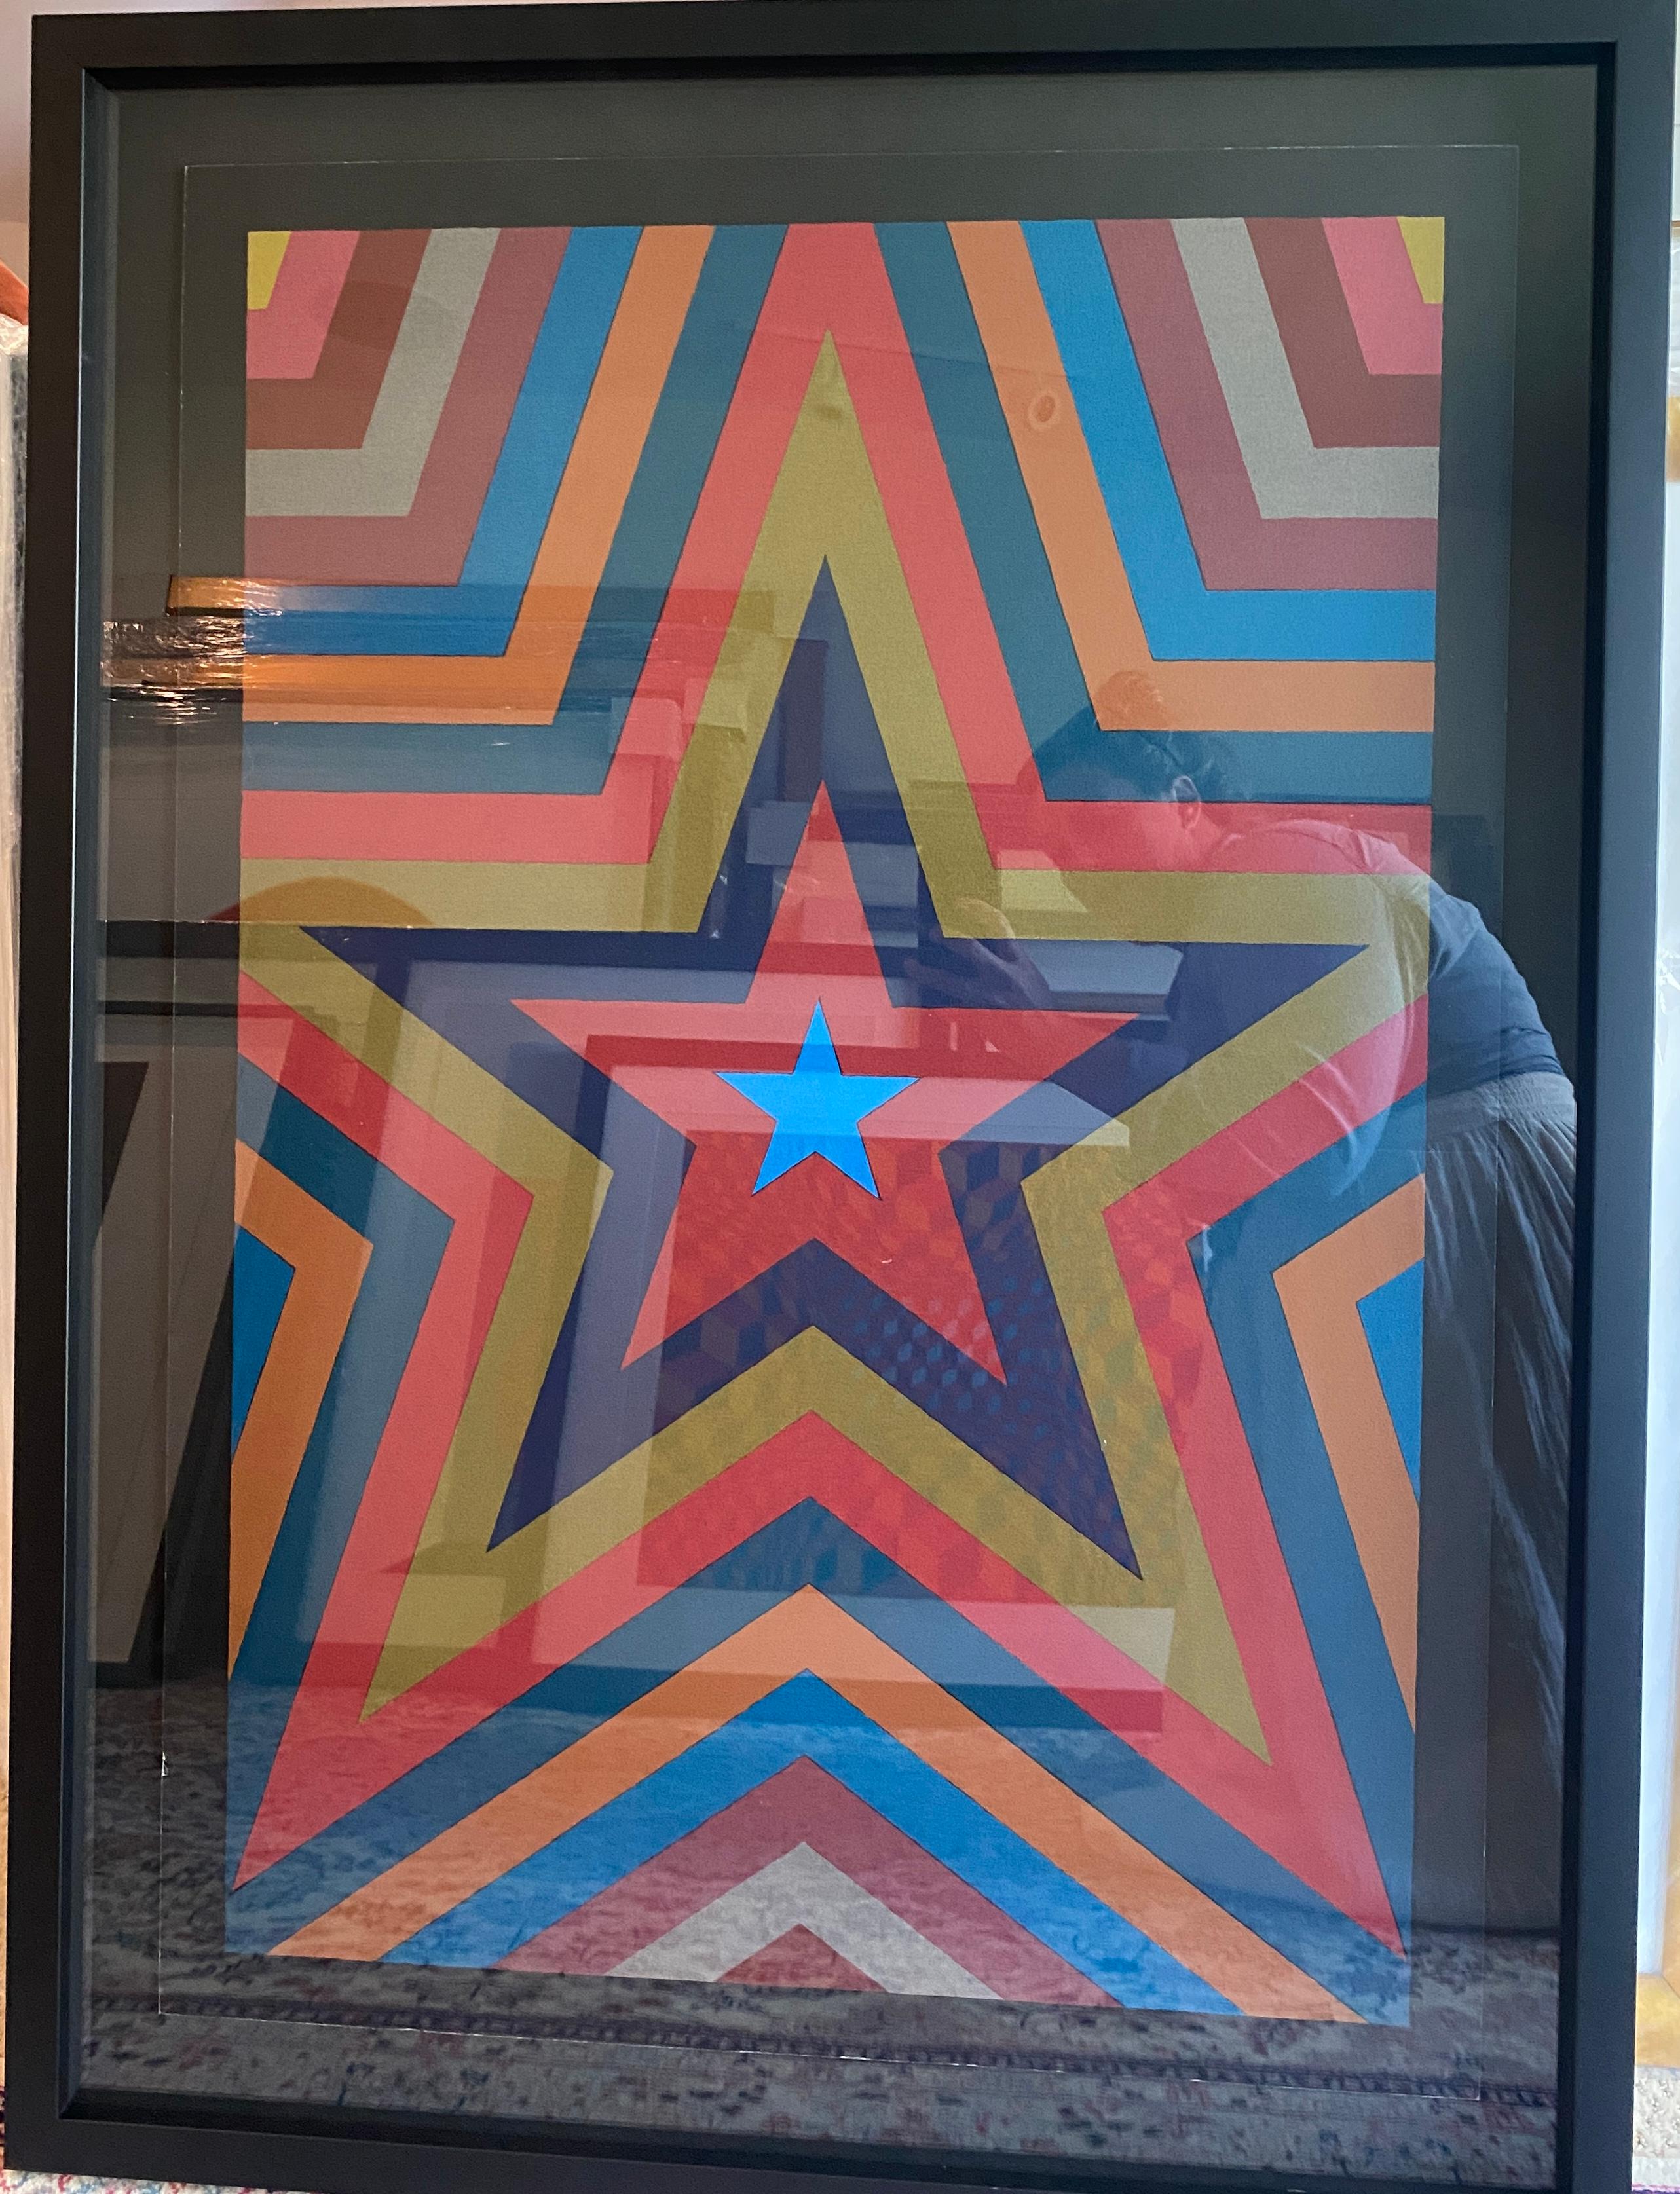 Five Pointed Star - Print by Sol LeWitt